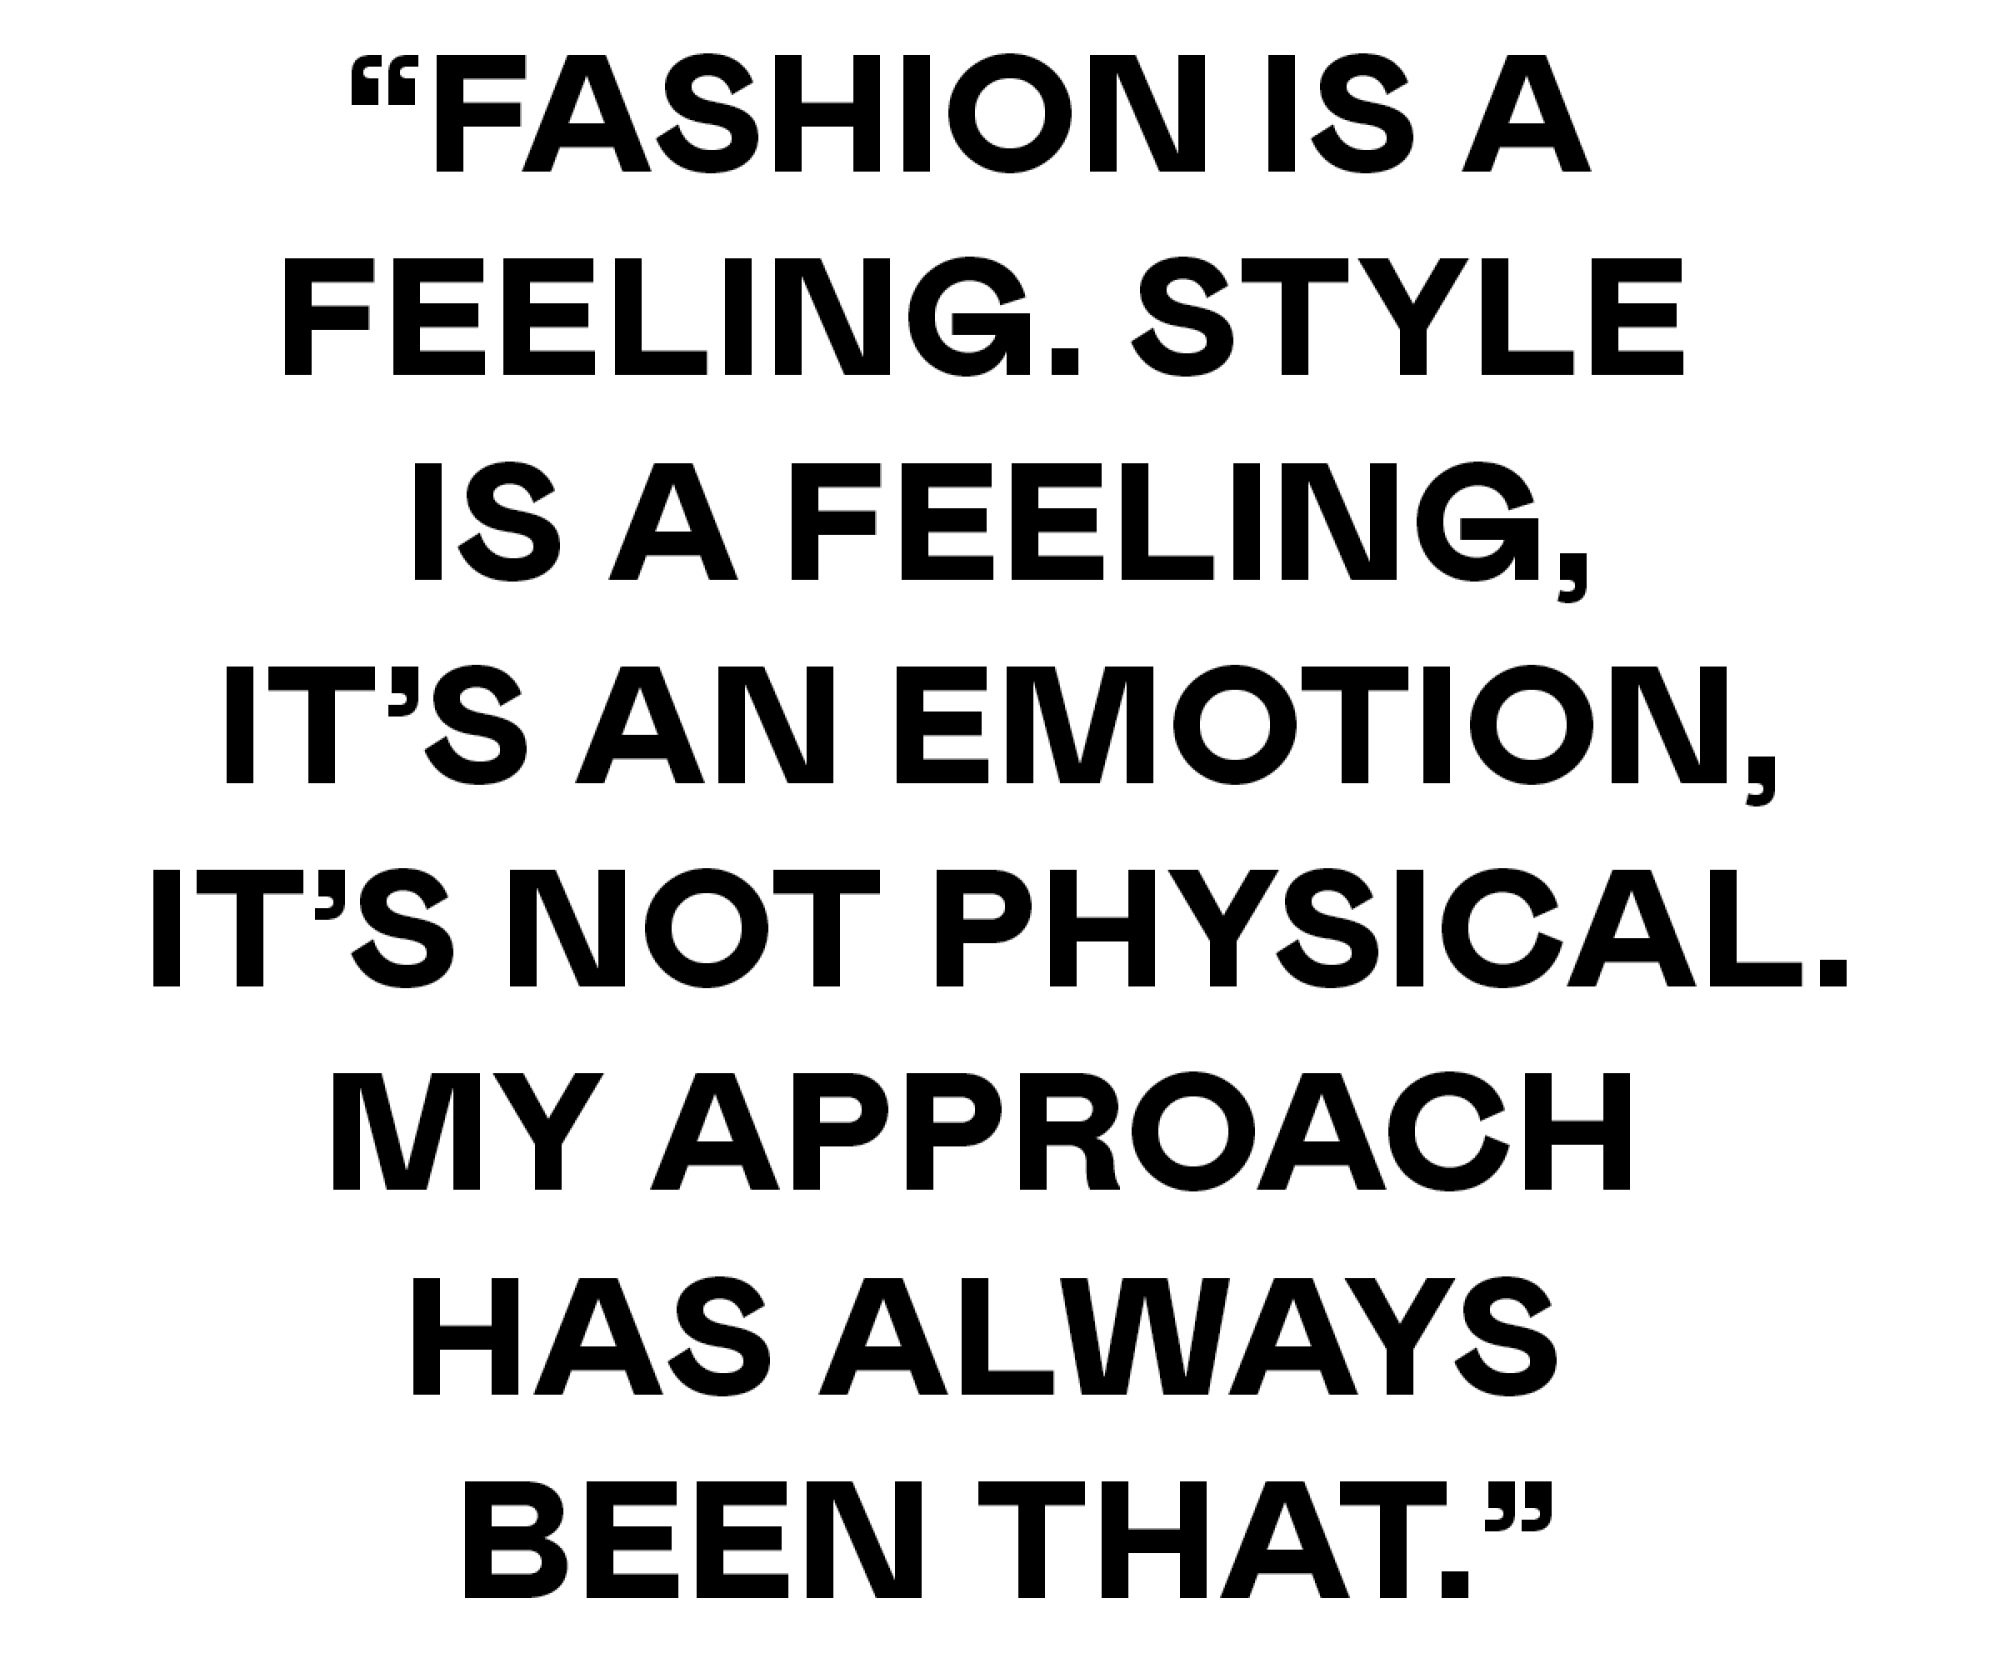 Fashion is a feeling. Style is a feeling, it’s an emotion, it’s not physical. My approach has always 
been that.